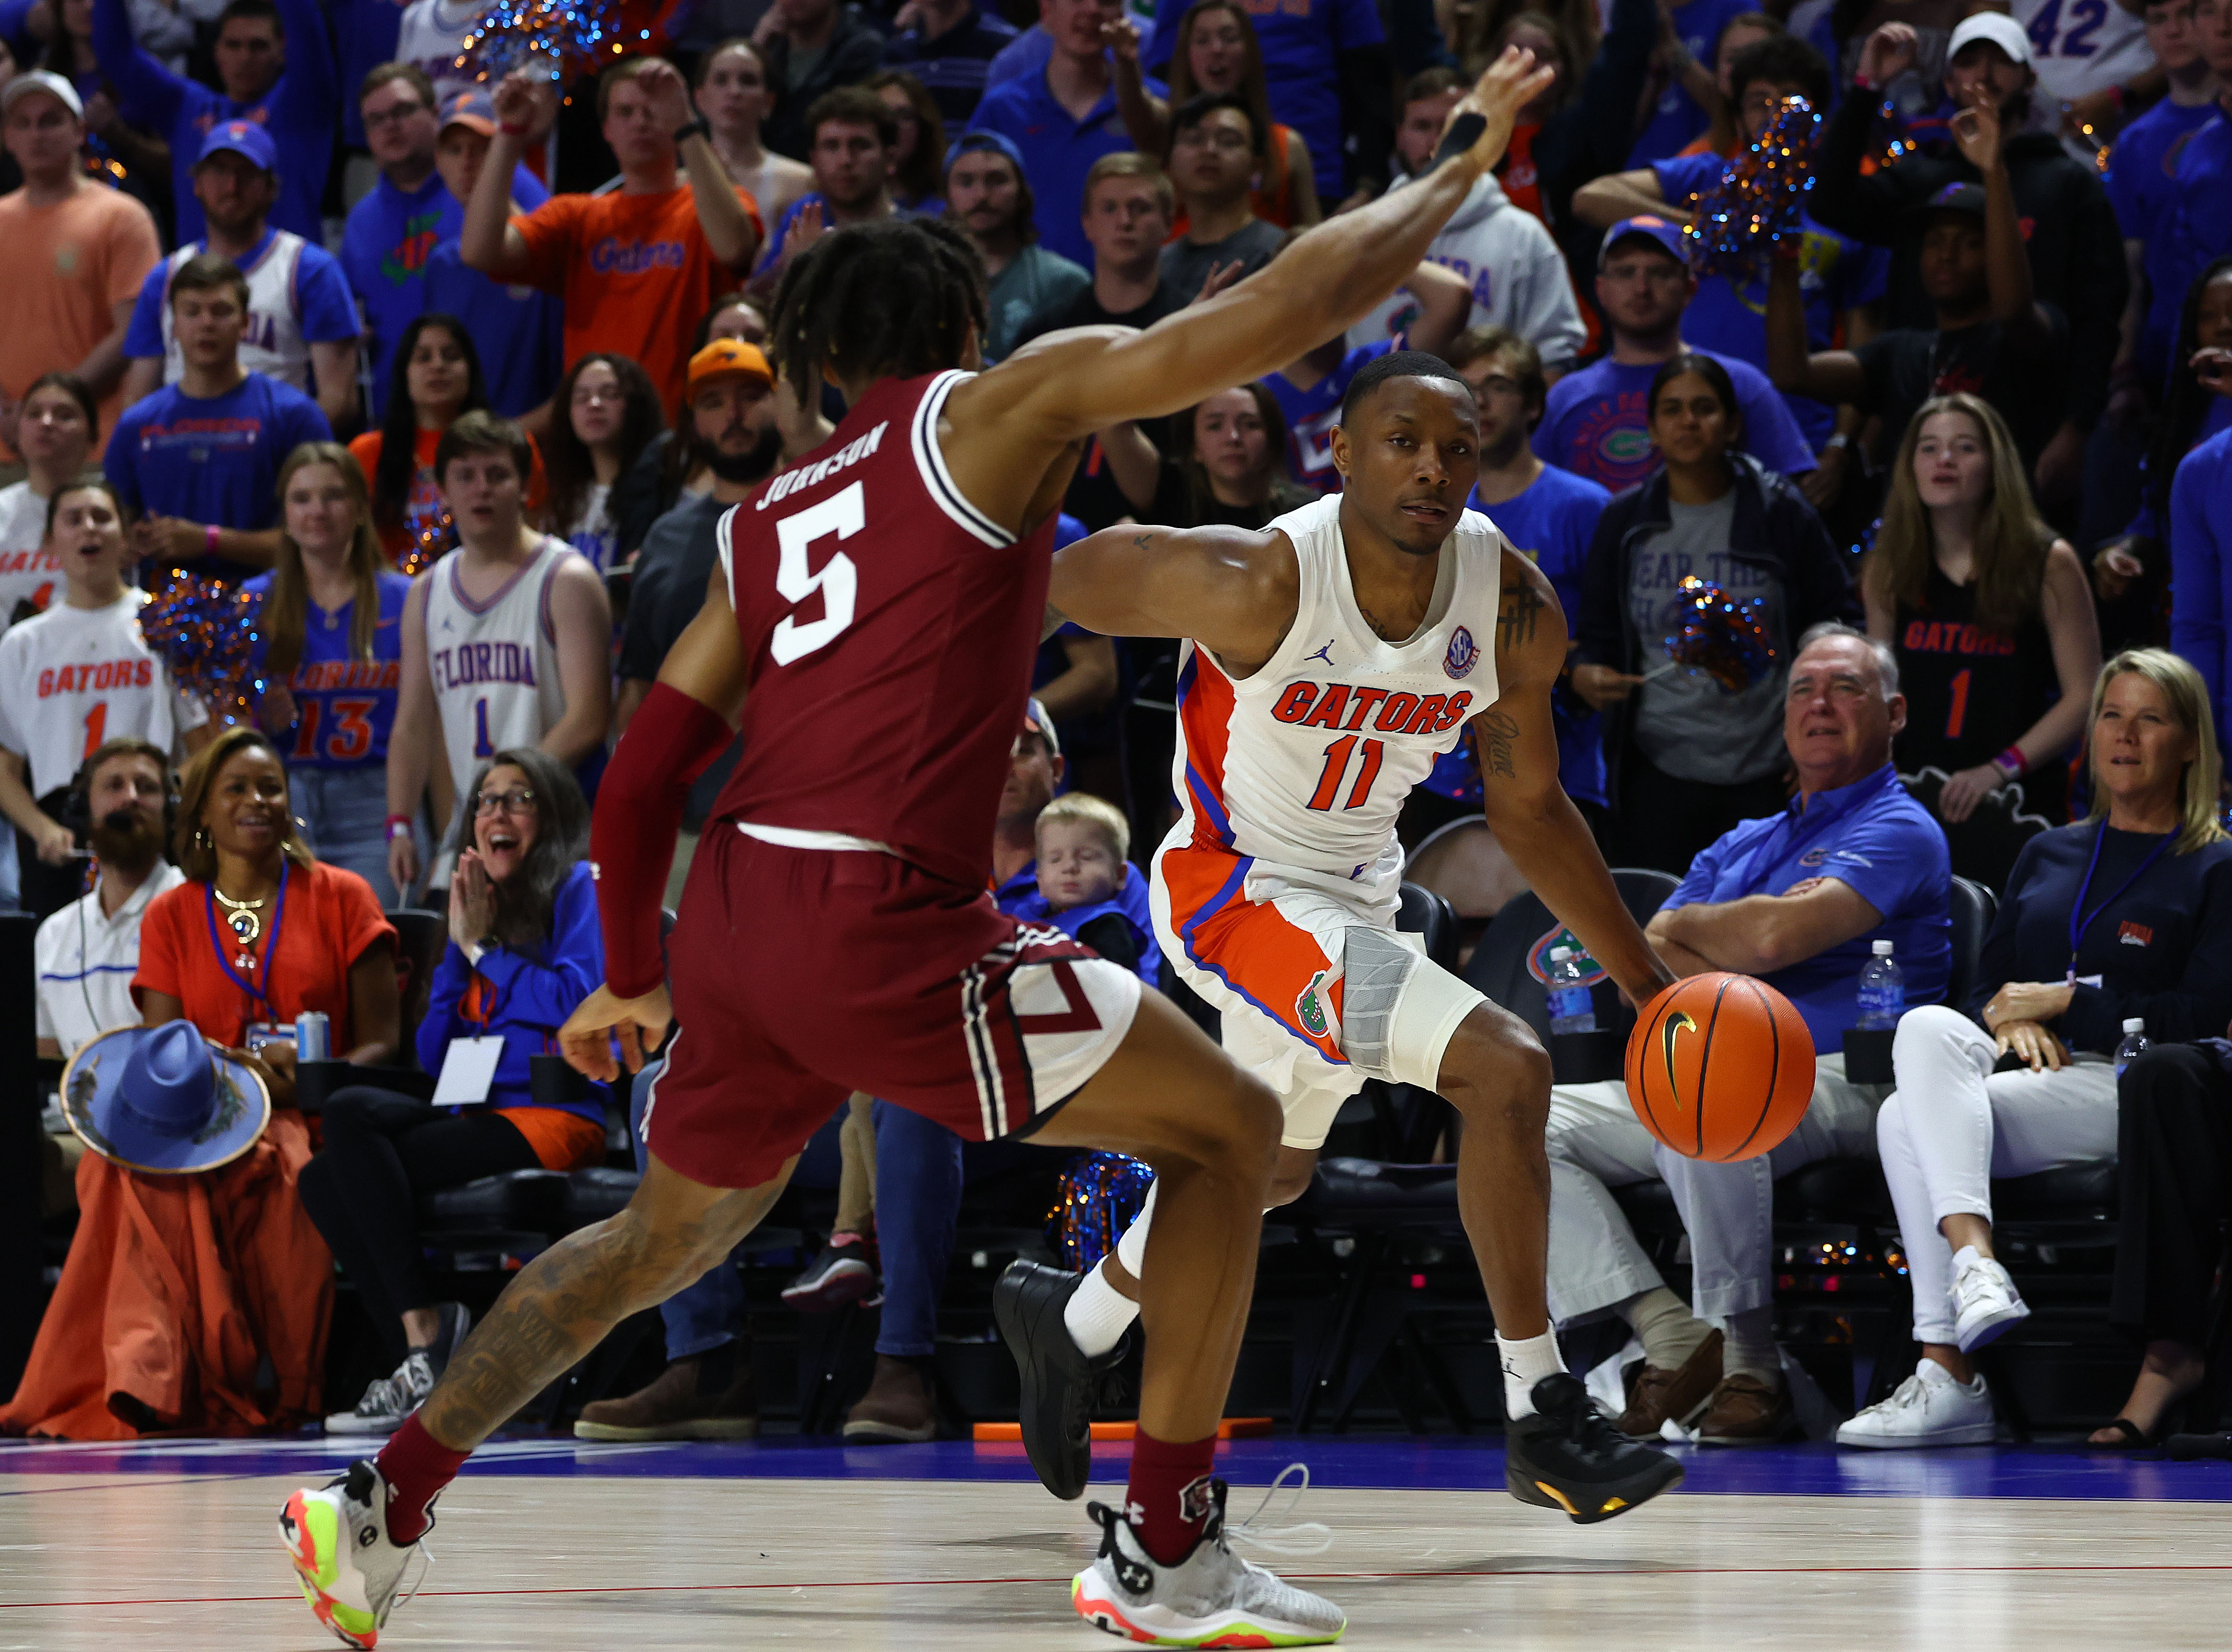 Gamecocks Run Out of Arena By Florida Gators